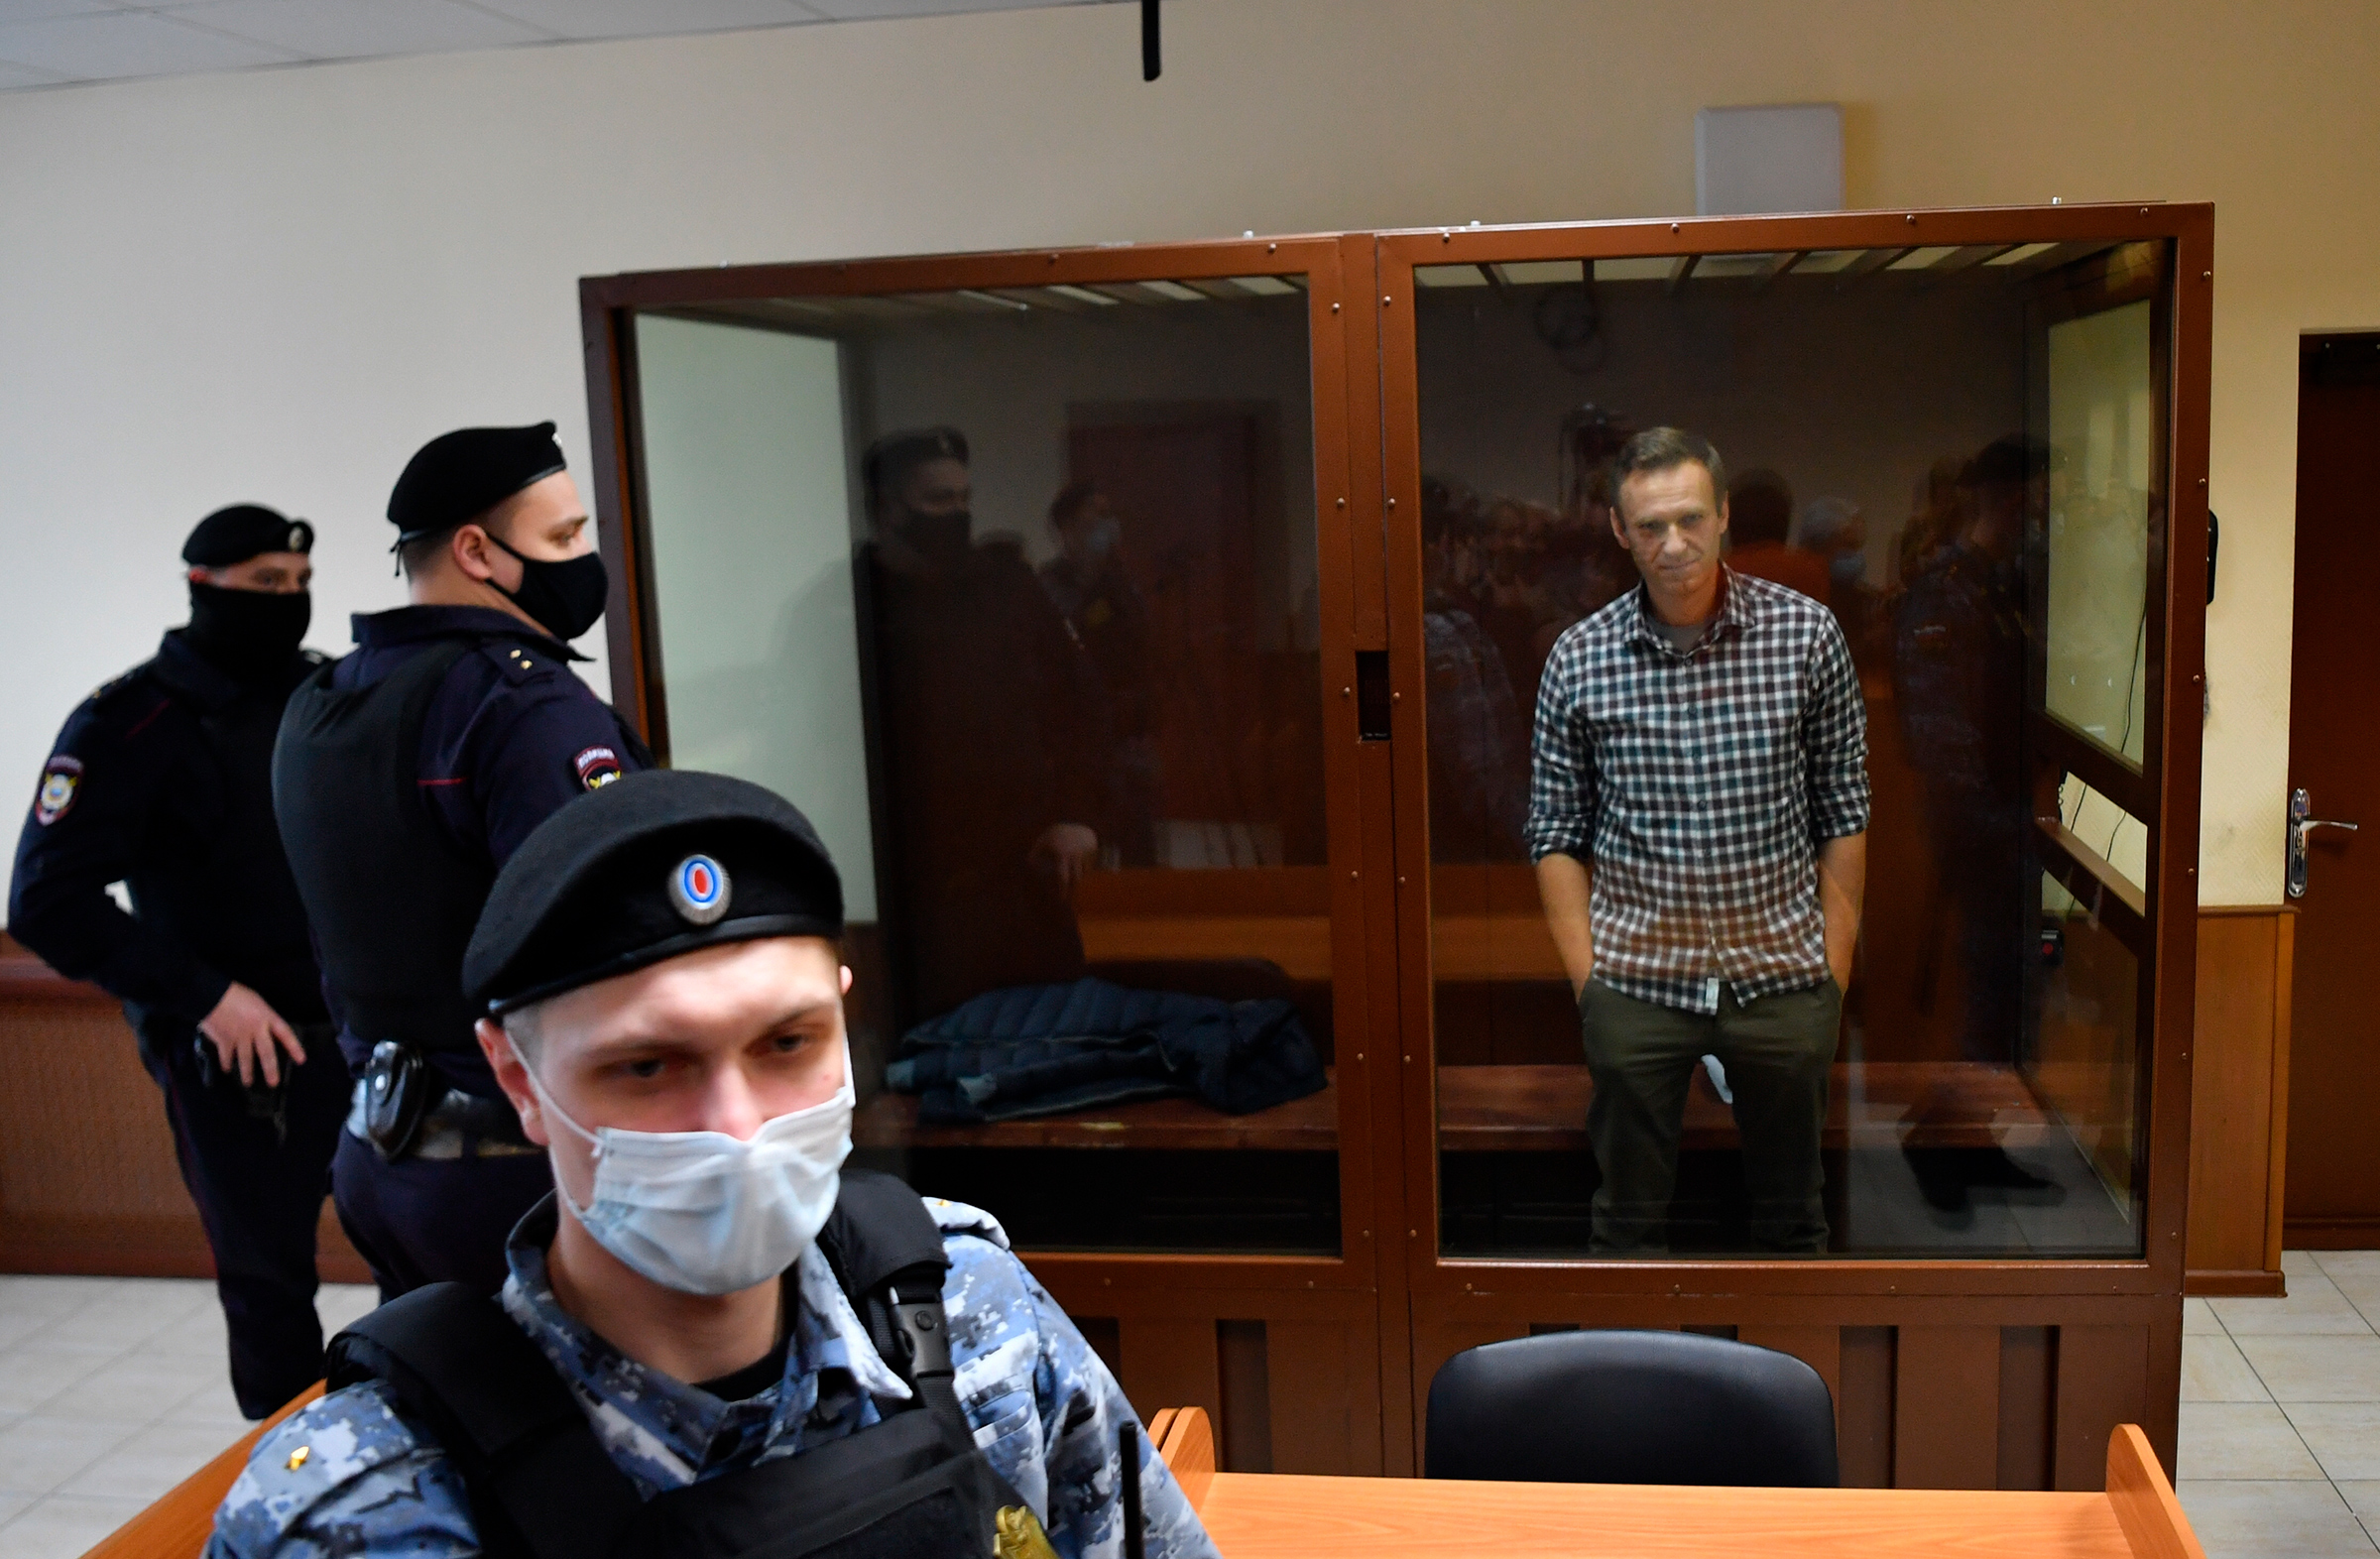 Navalny waits in a courtroom during a hearing on appellation to cancel the decision to replace his suspended sentence in the Yves Rocher fraud case with a jail term at Babushkinsky Court, Moscow, on Feb. 20. (Pavel Bednyakov—Sputnik/AP)